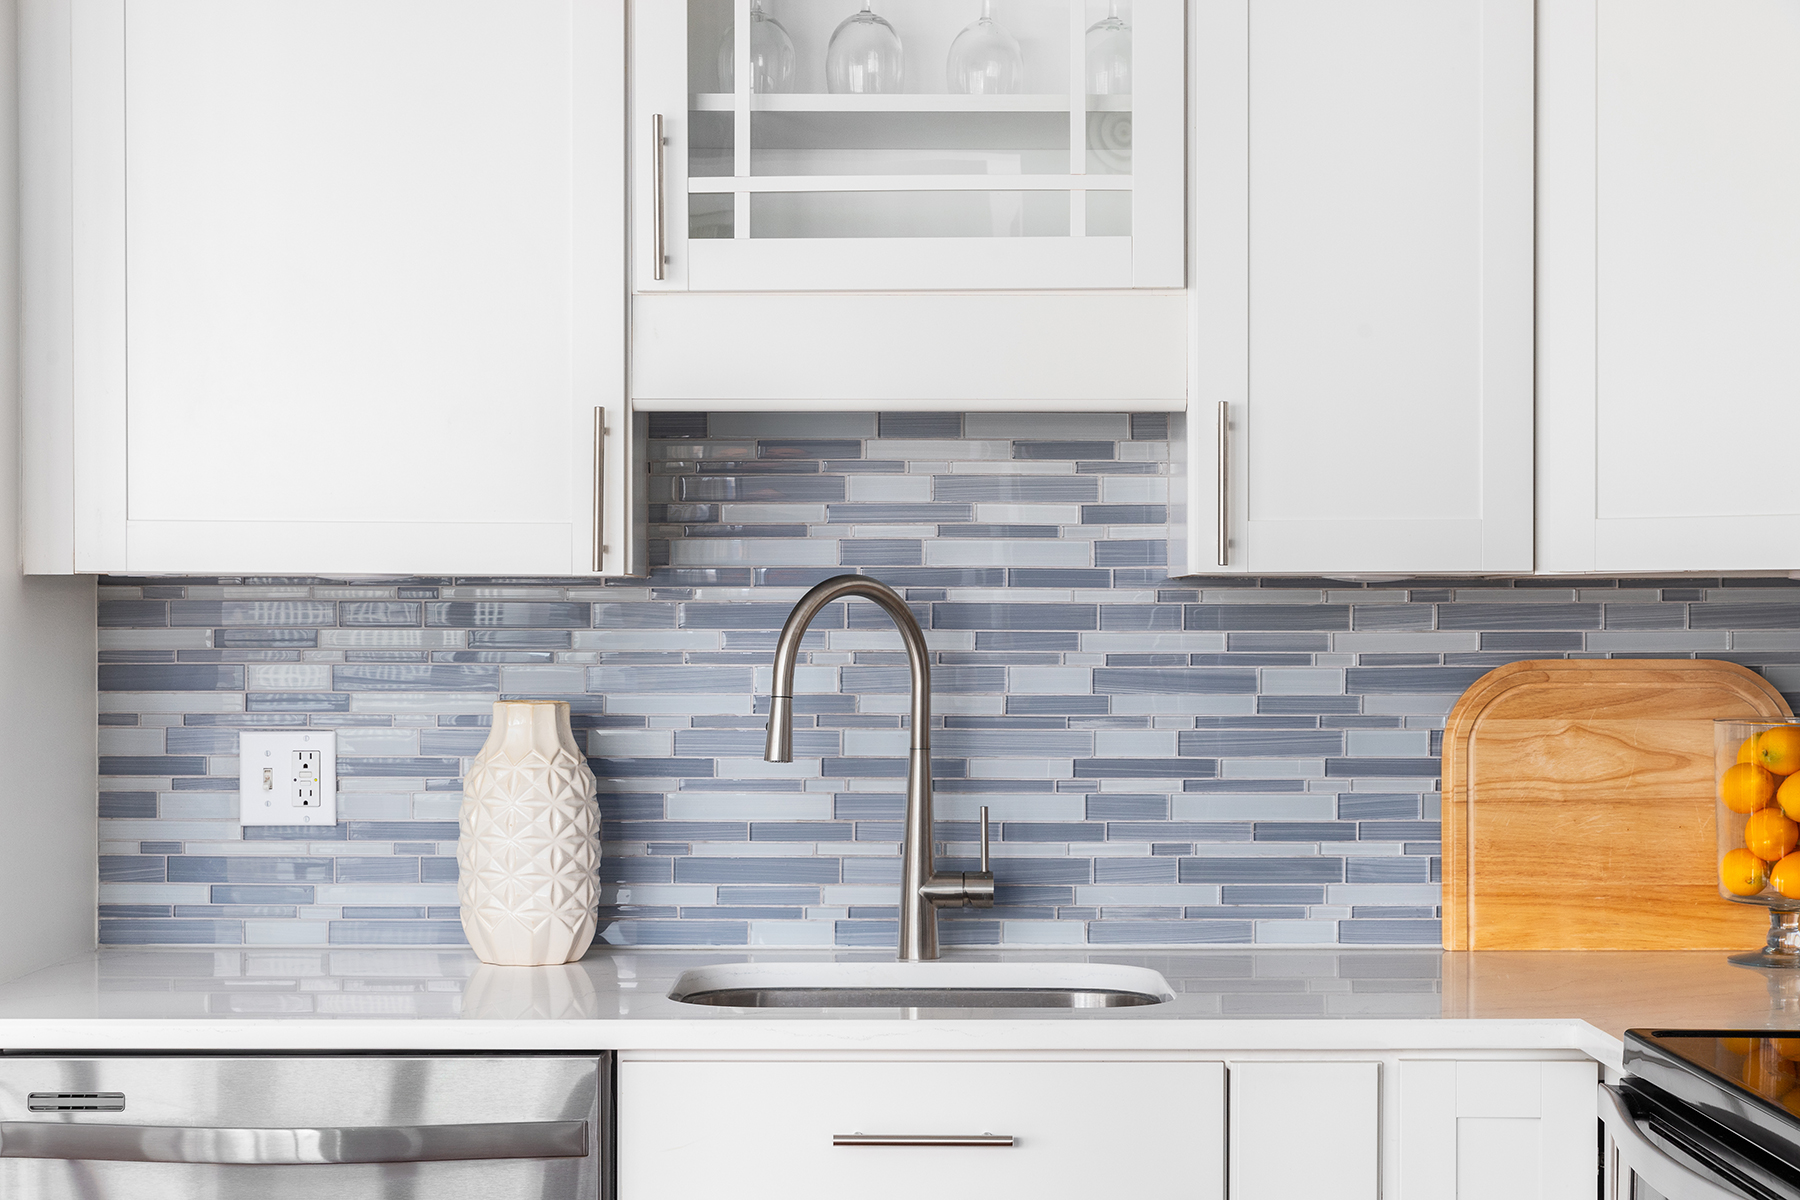 4-Unexpected-Backsplash-Ideas-for-Your-Kitchen-Remodel-1